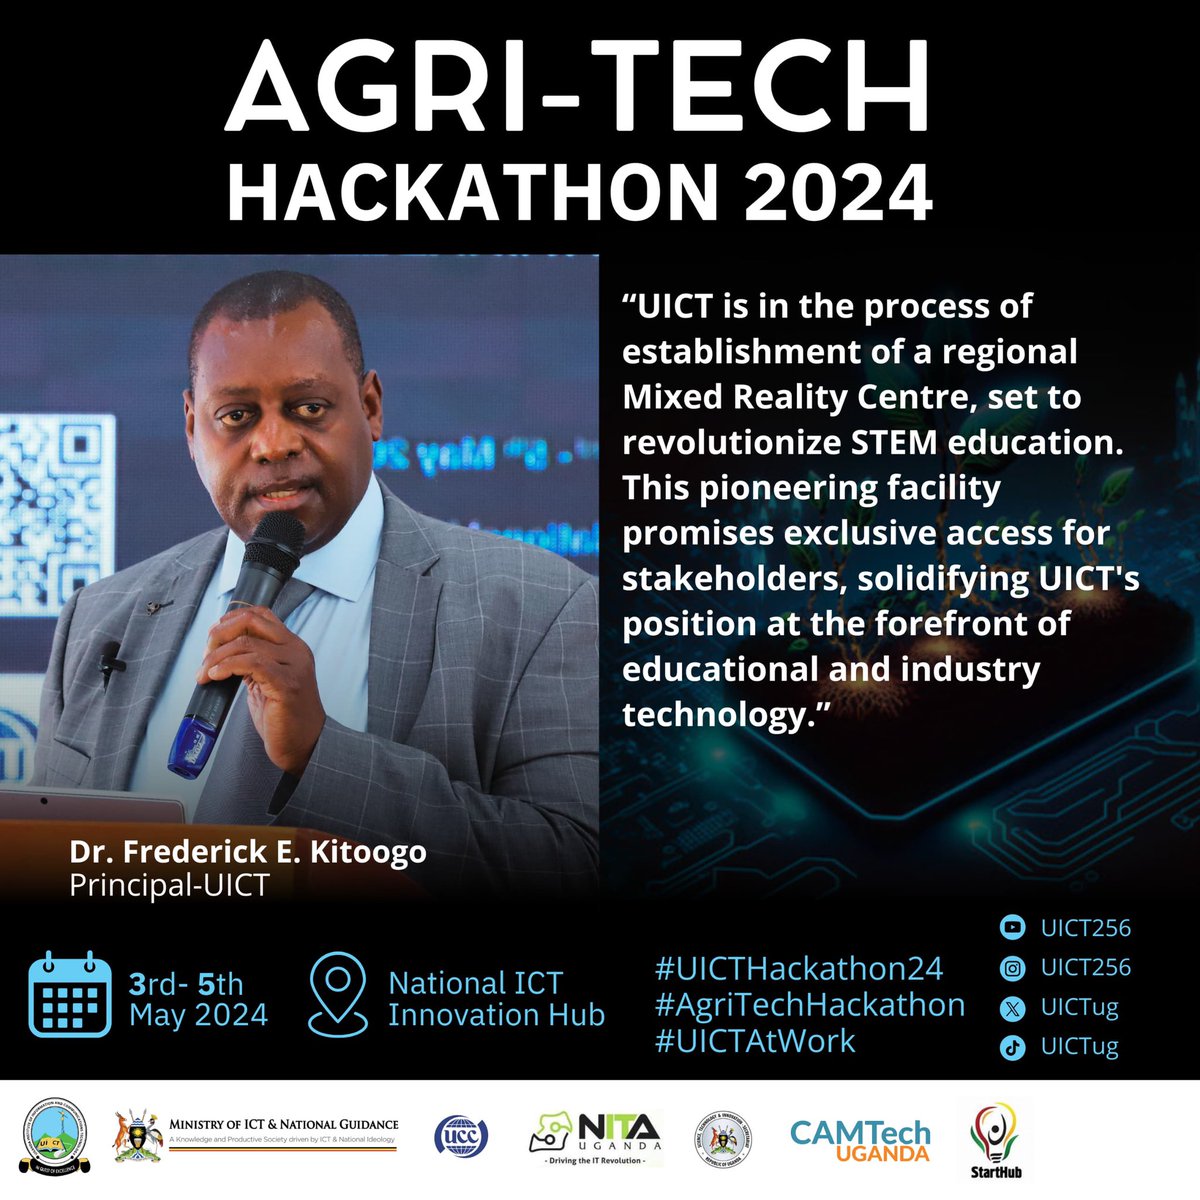 The theme for the AgriTech Hackathon 2024 at UICT sounds promising! It's inspiring to see efforts being made to leverage technology for sustainable agriculture in Uganda.